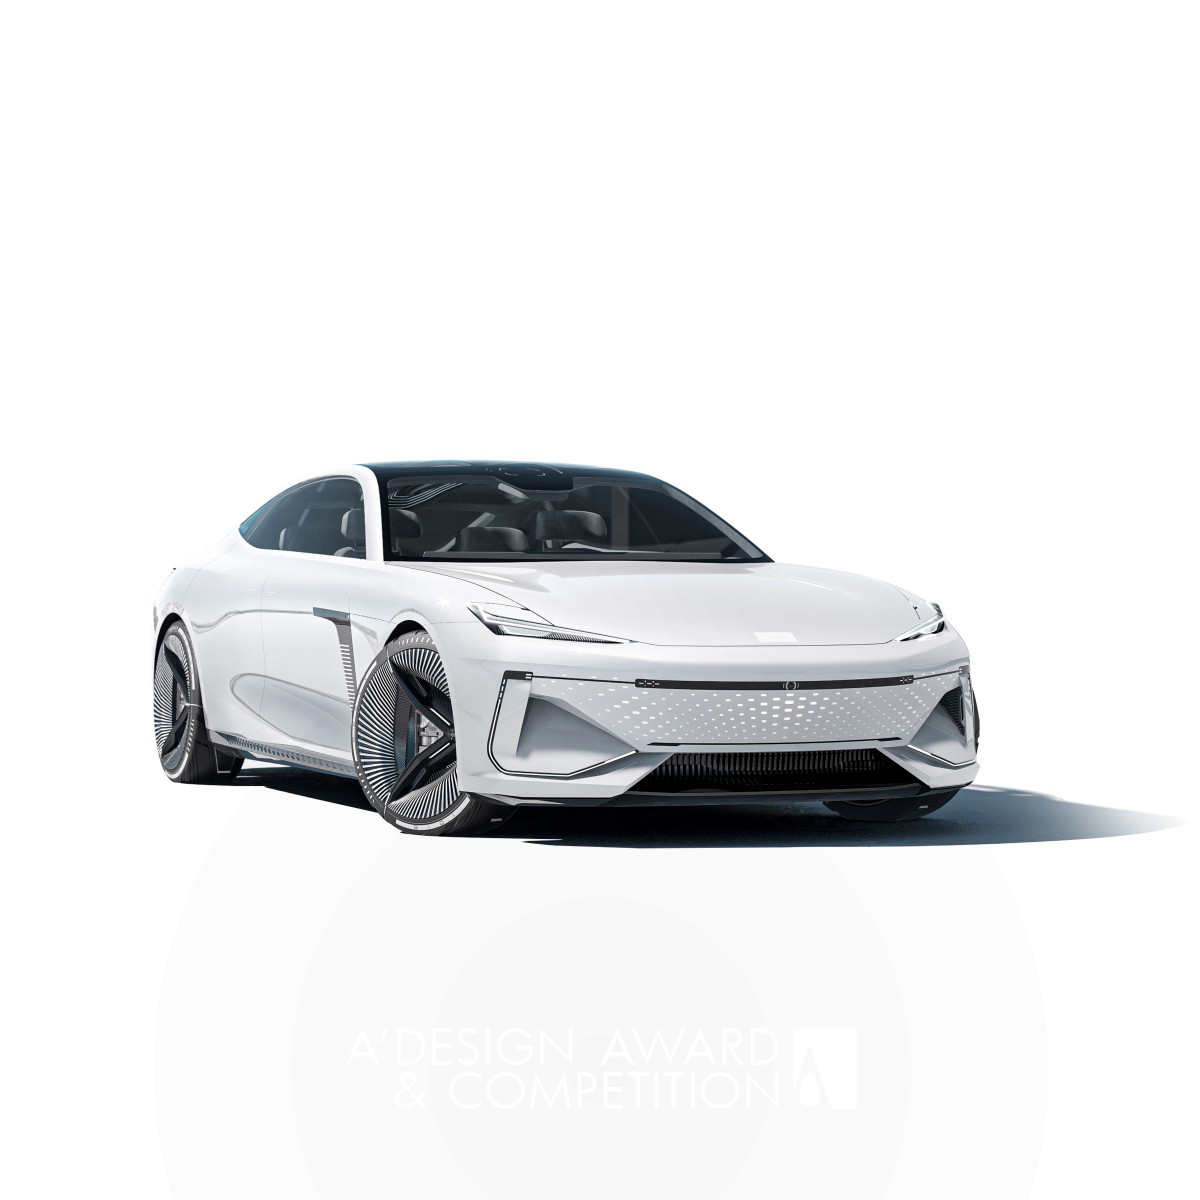 Galaxy Light Concept Car by Geely Auto Group Holding Co., Ltd